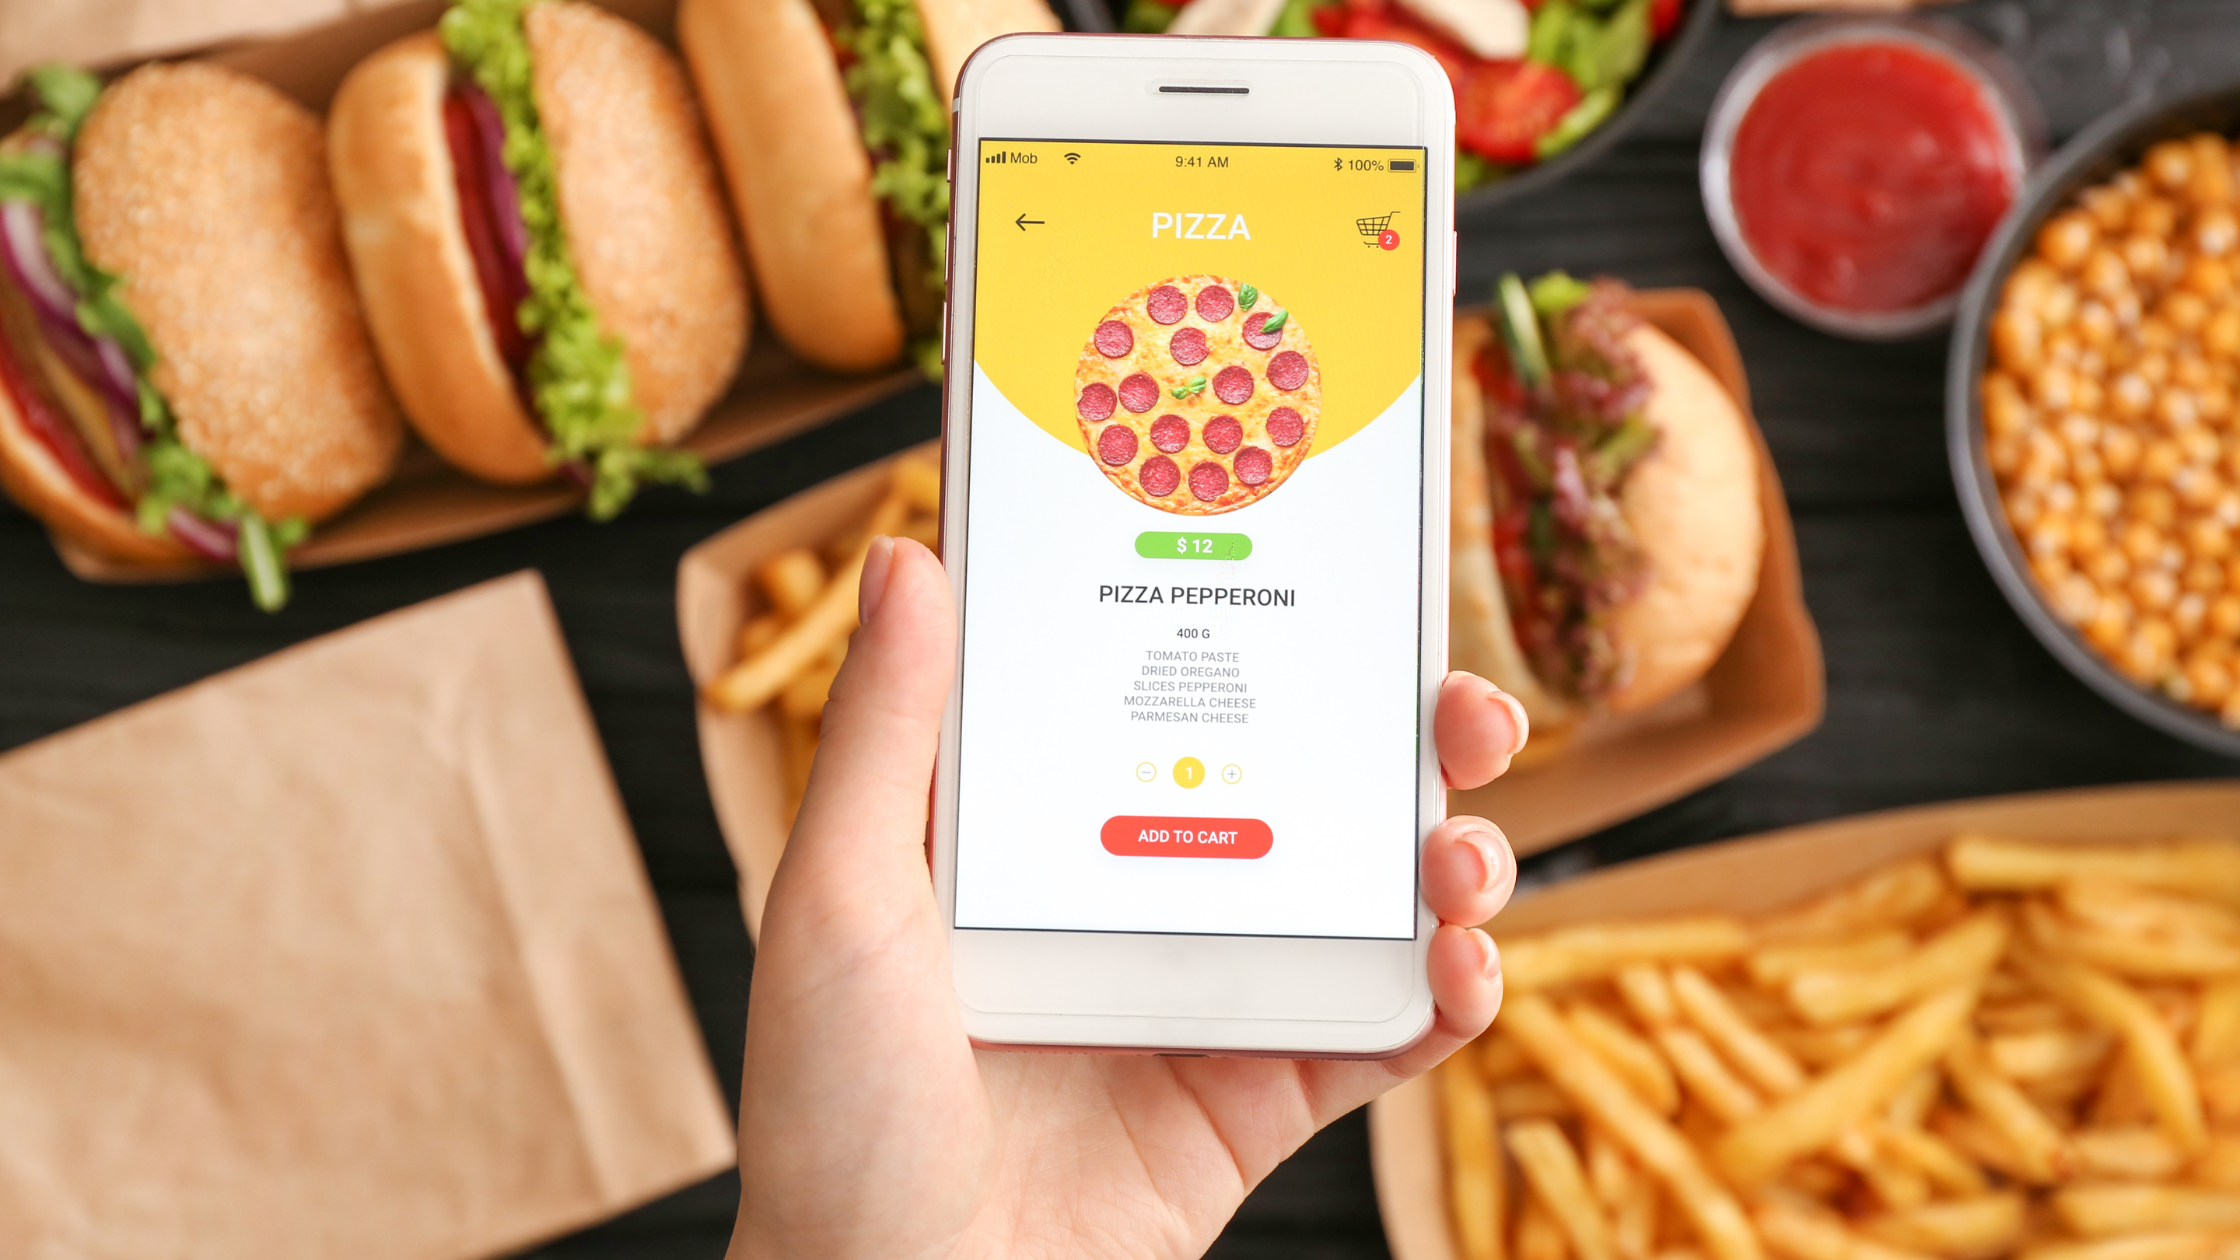 Future of online ordering